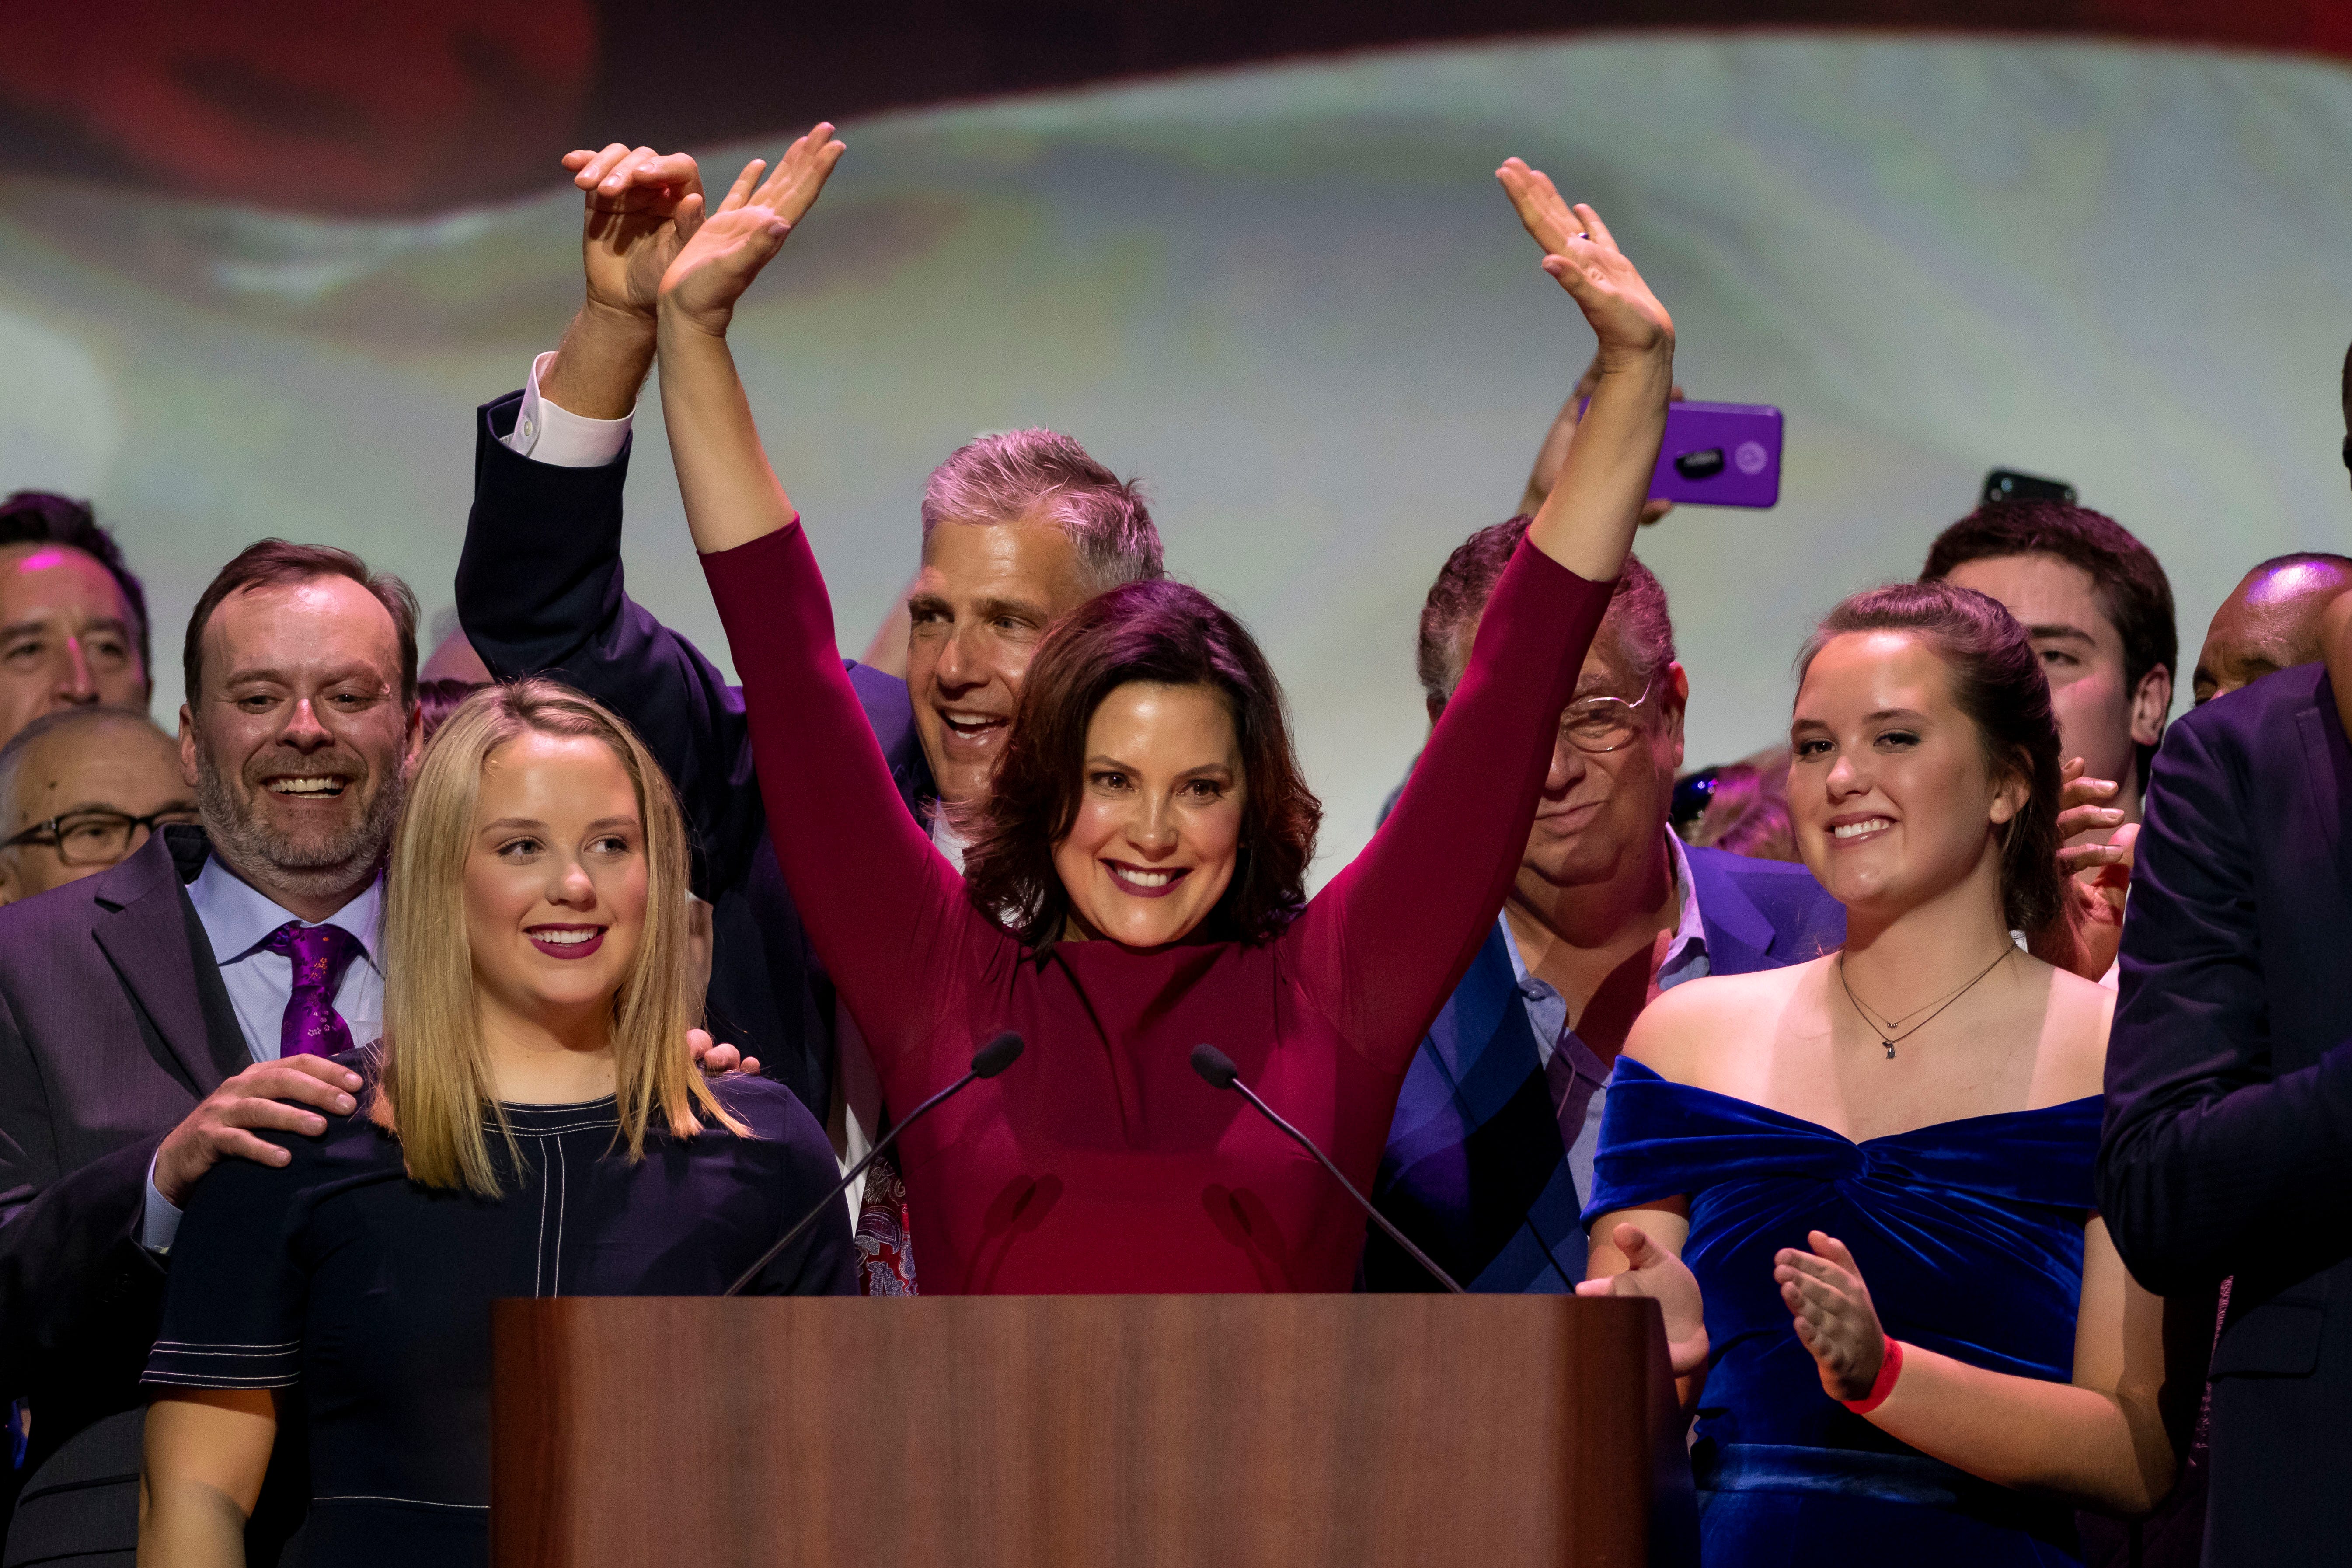 Gretchen Whitmer gives her acceptance speech after being elected the next governor of Michigan. The Michigan Democratic Party held its election night event at the Sound Board Theater at Motor City Casino in Detroit, November 6, 2018.